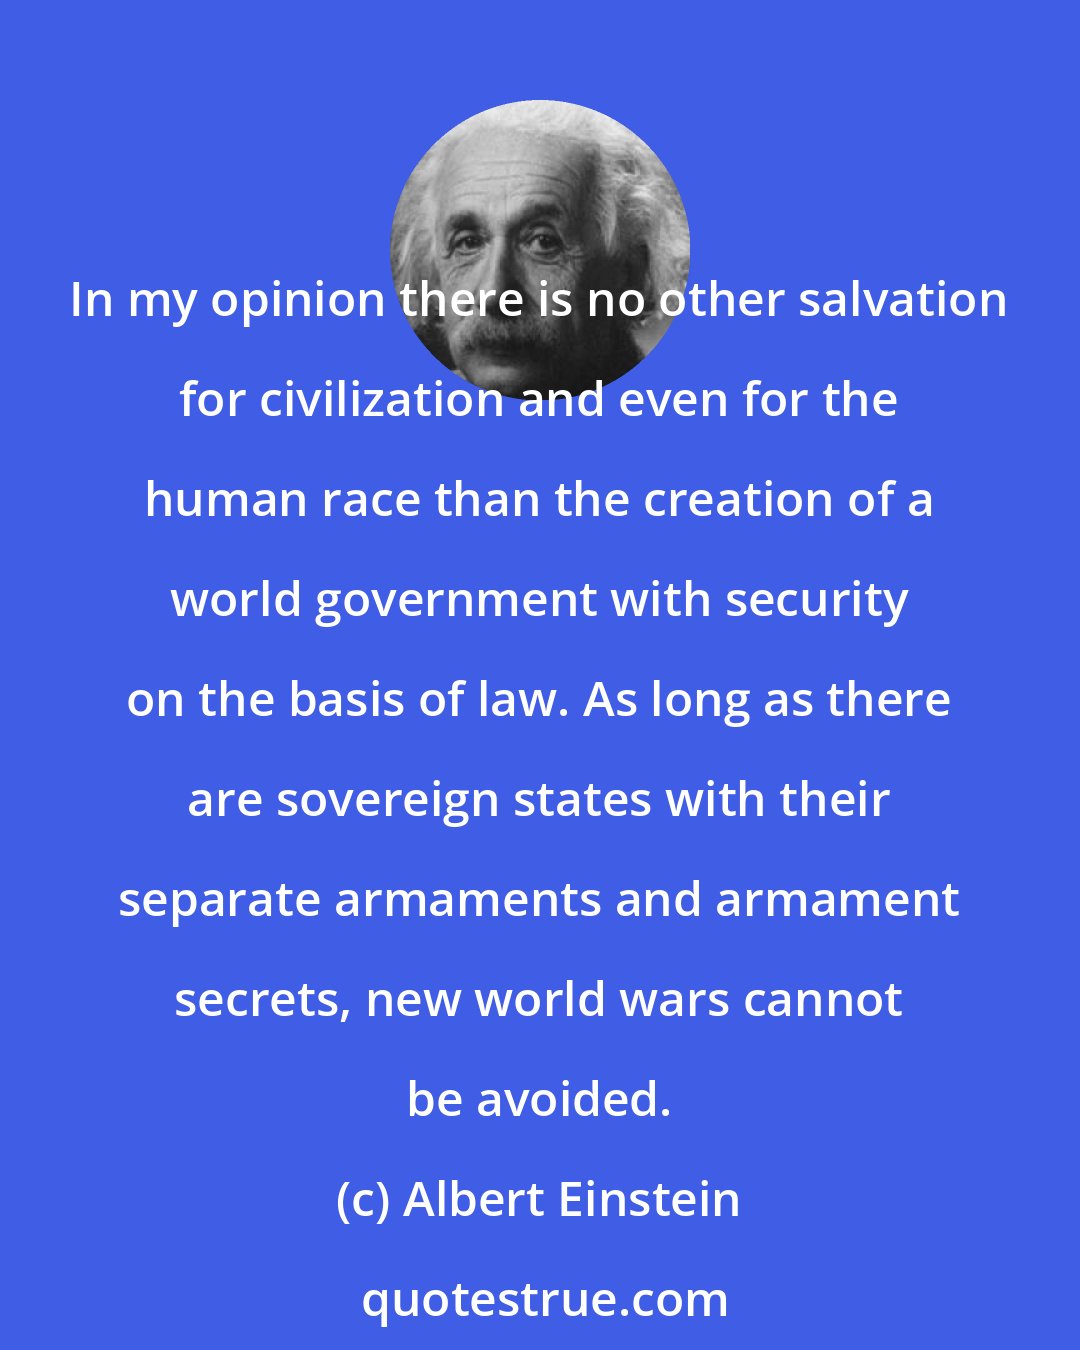 Albert Einstein: In my opinion there is no other salvation for civilization and even for the human race than the creation of a world government with security on the basis of law. As long as there are sovereign states with their separate armaments and armament secrets, new world wars cannot be avoided.